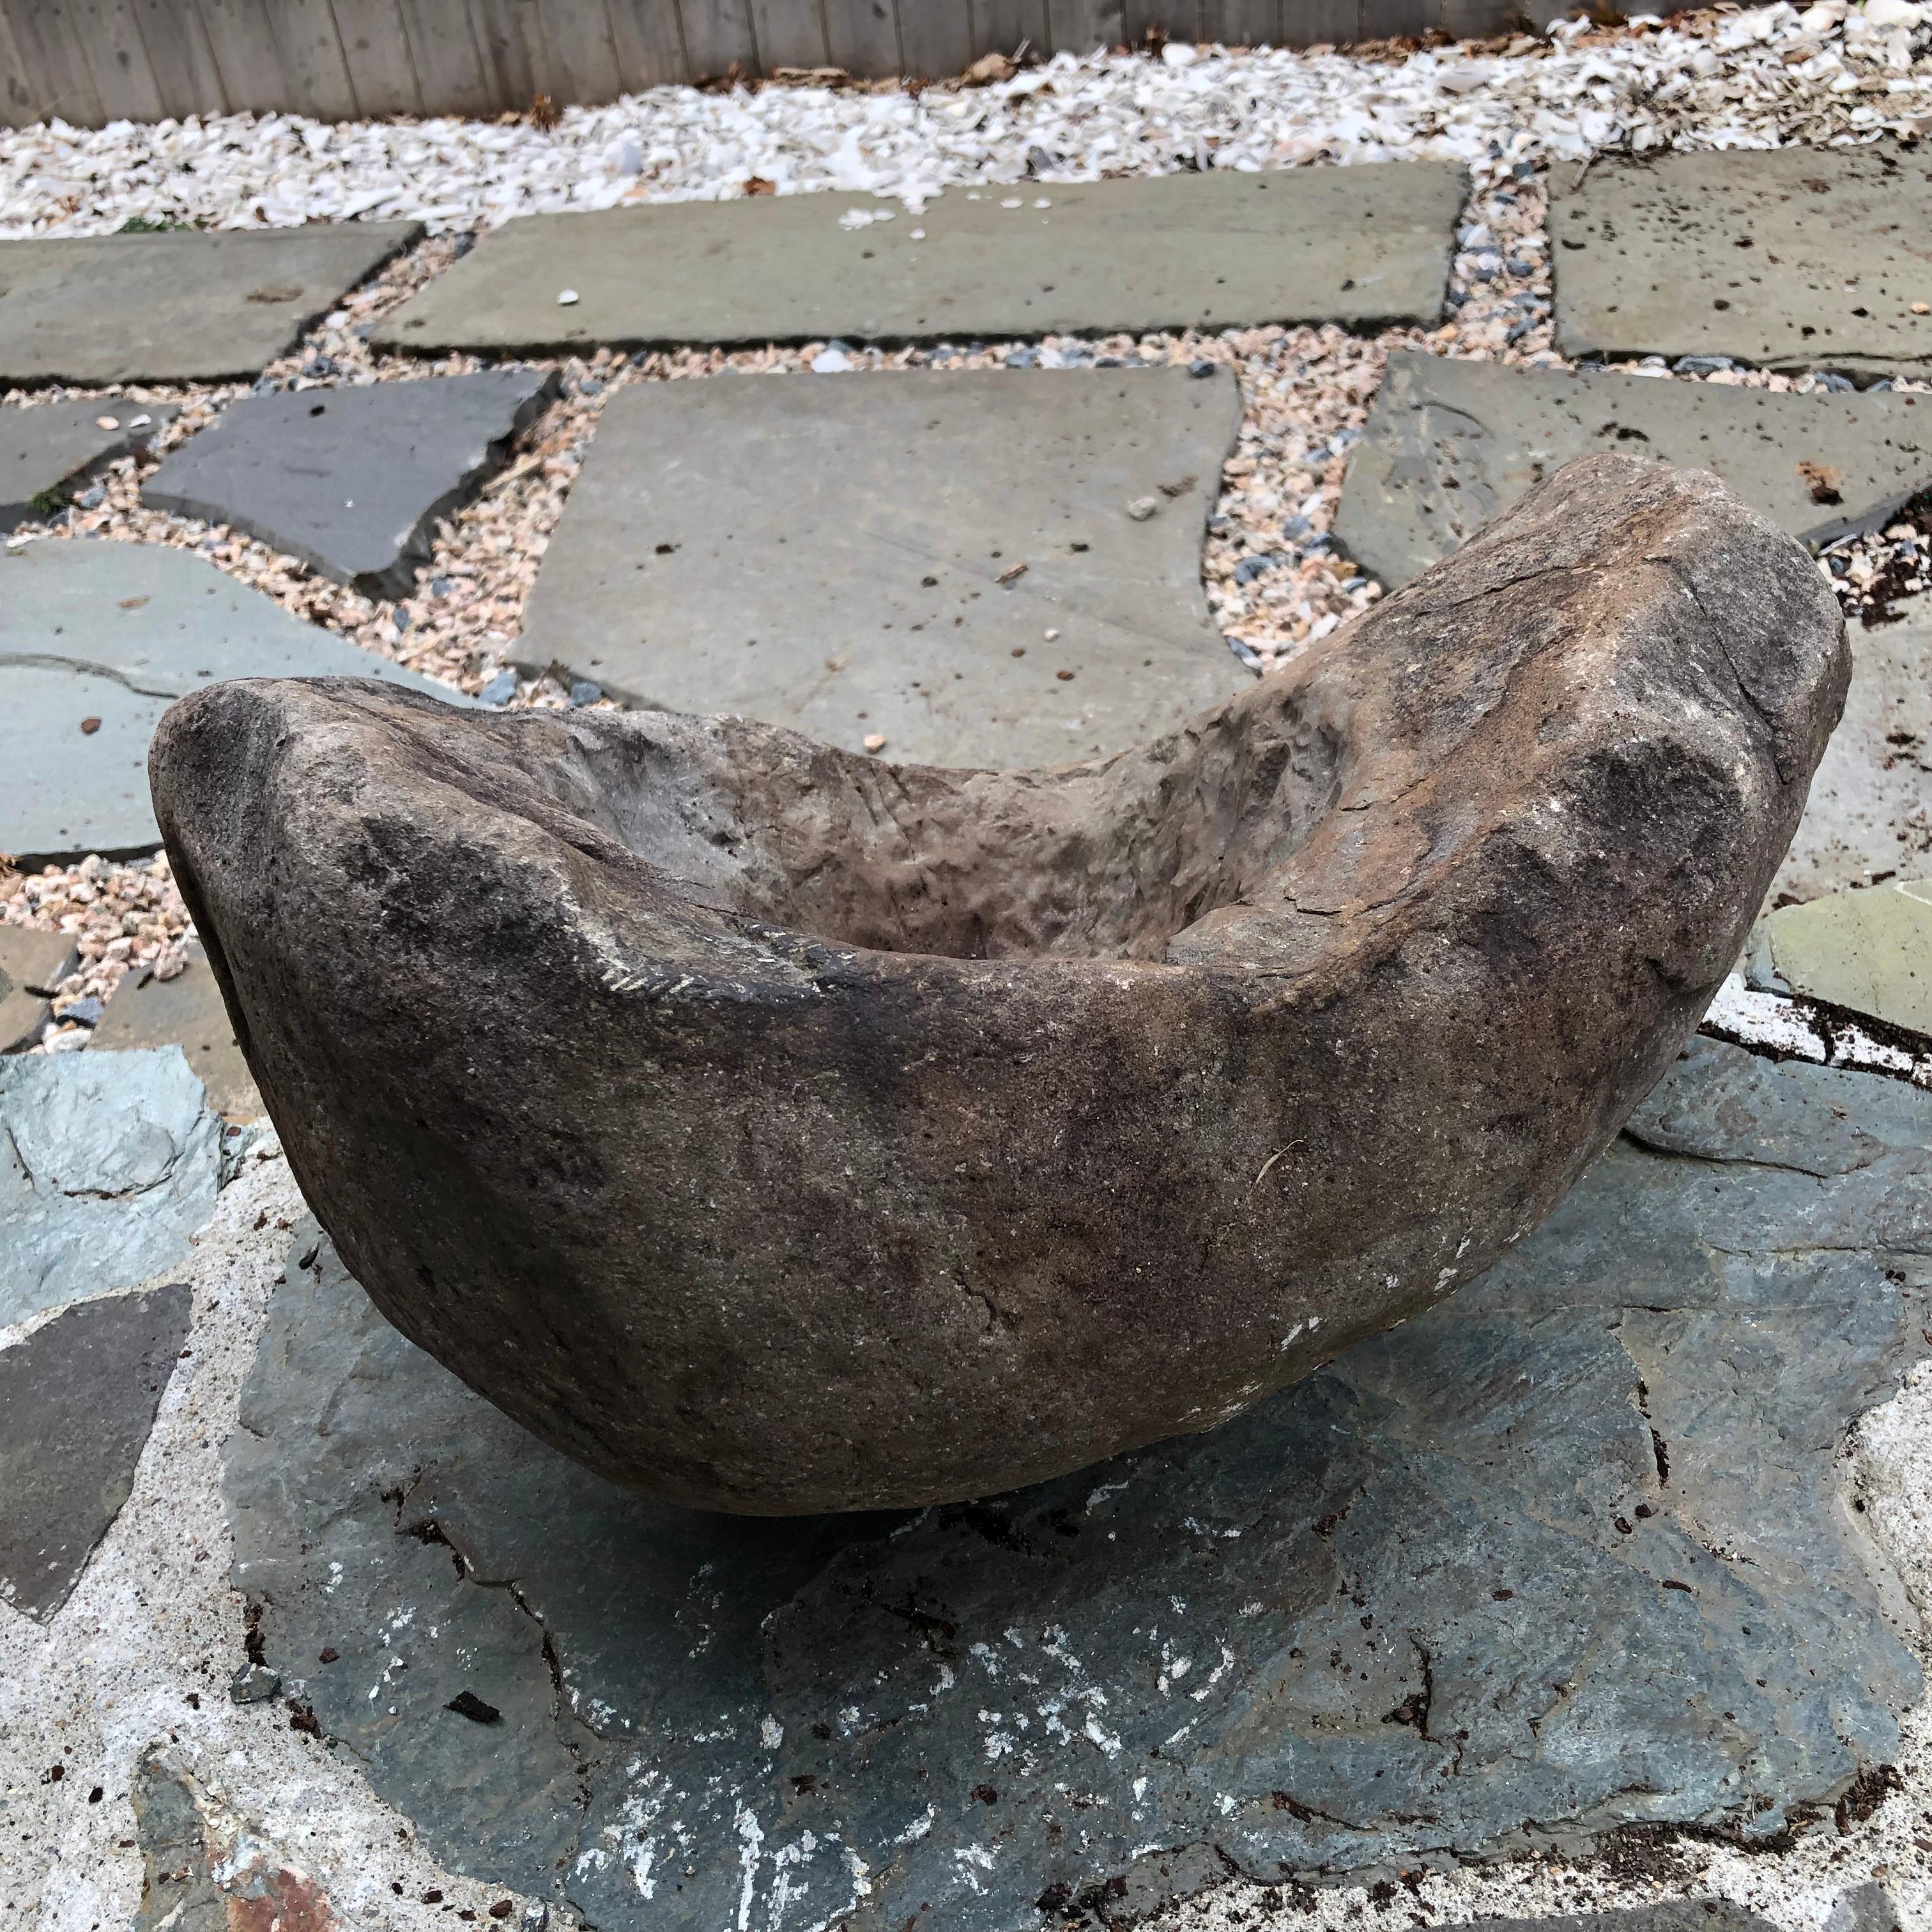 Japan, a handsome and unique antique natural organic shaped cradle shaped stone water basin planter -tsukubai- created from rare dark hard stone and sourced from a decades old garden. This is a unique and visually attractive garden planter or water